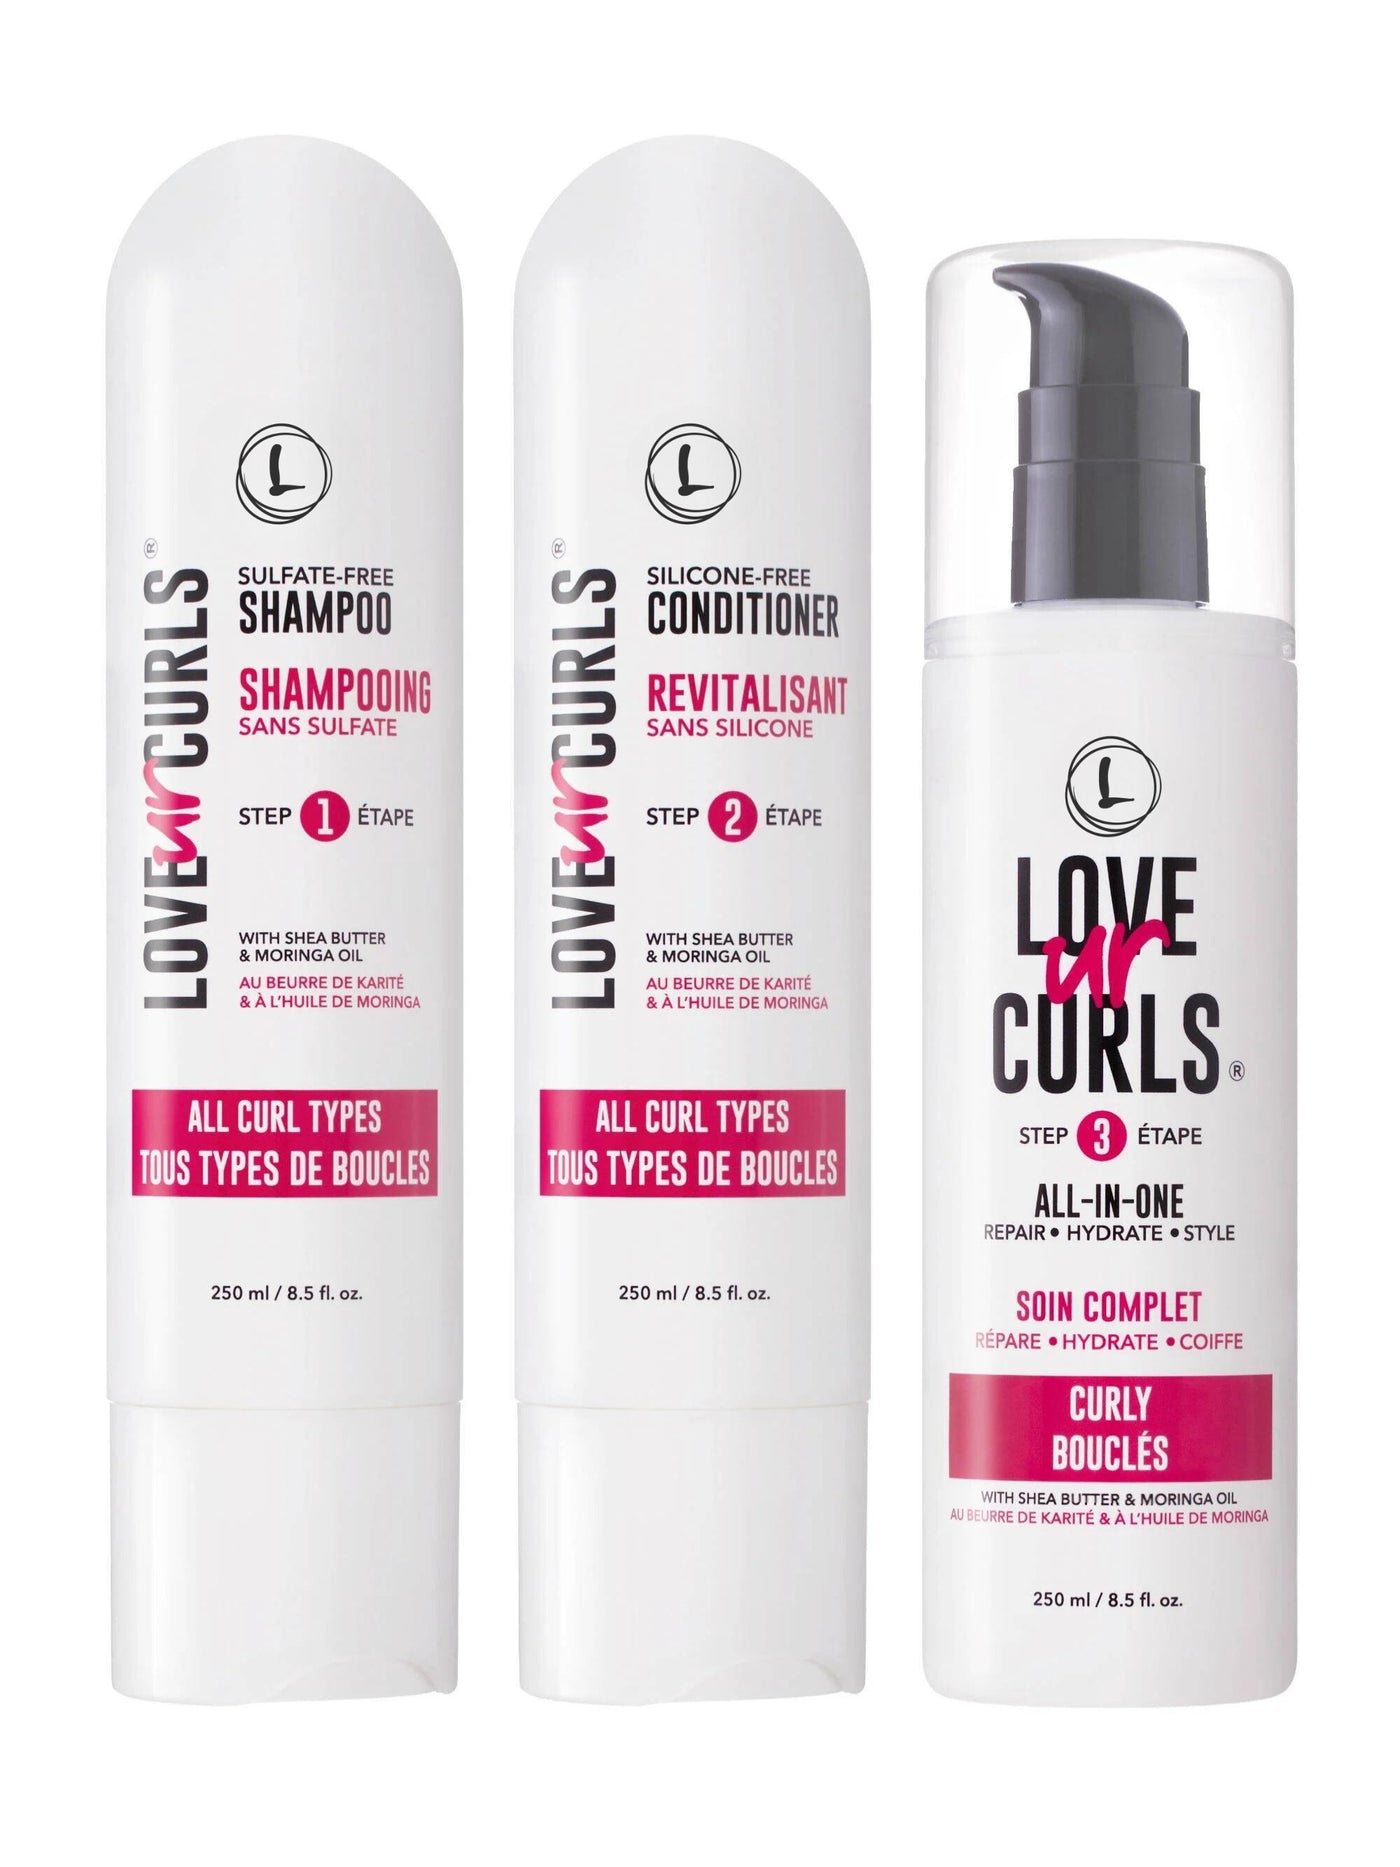 Products for Curly Hair